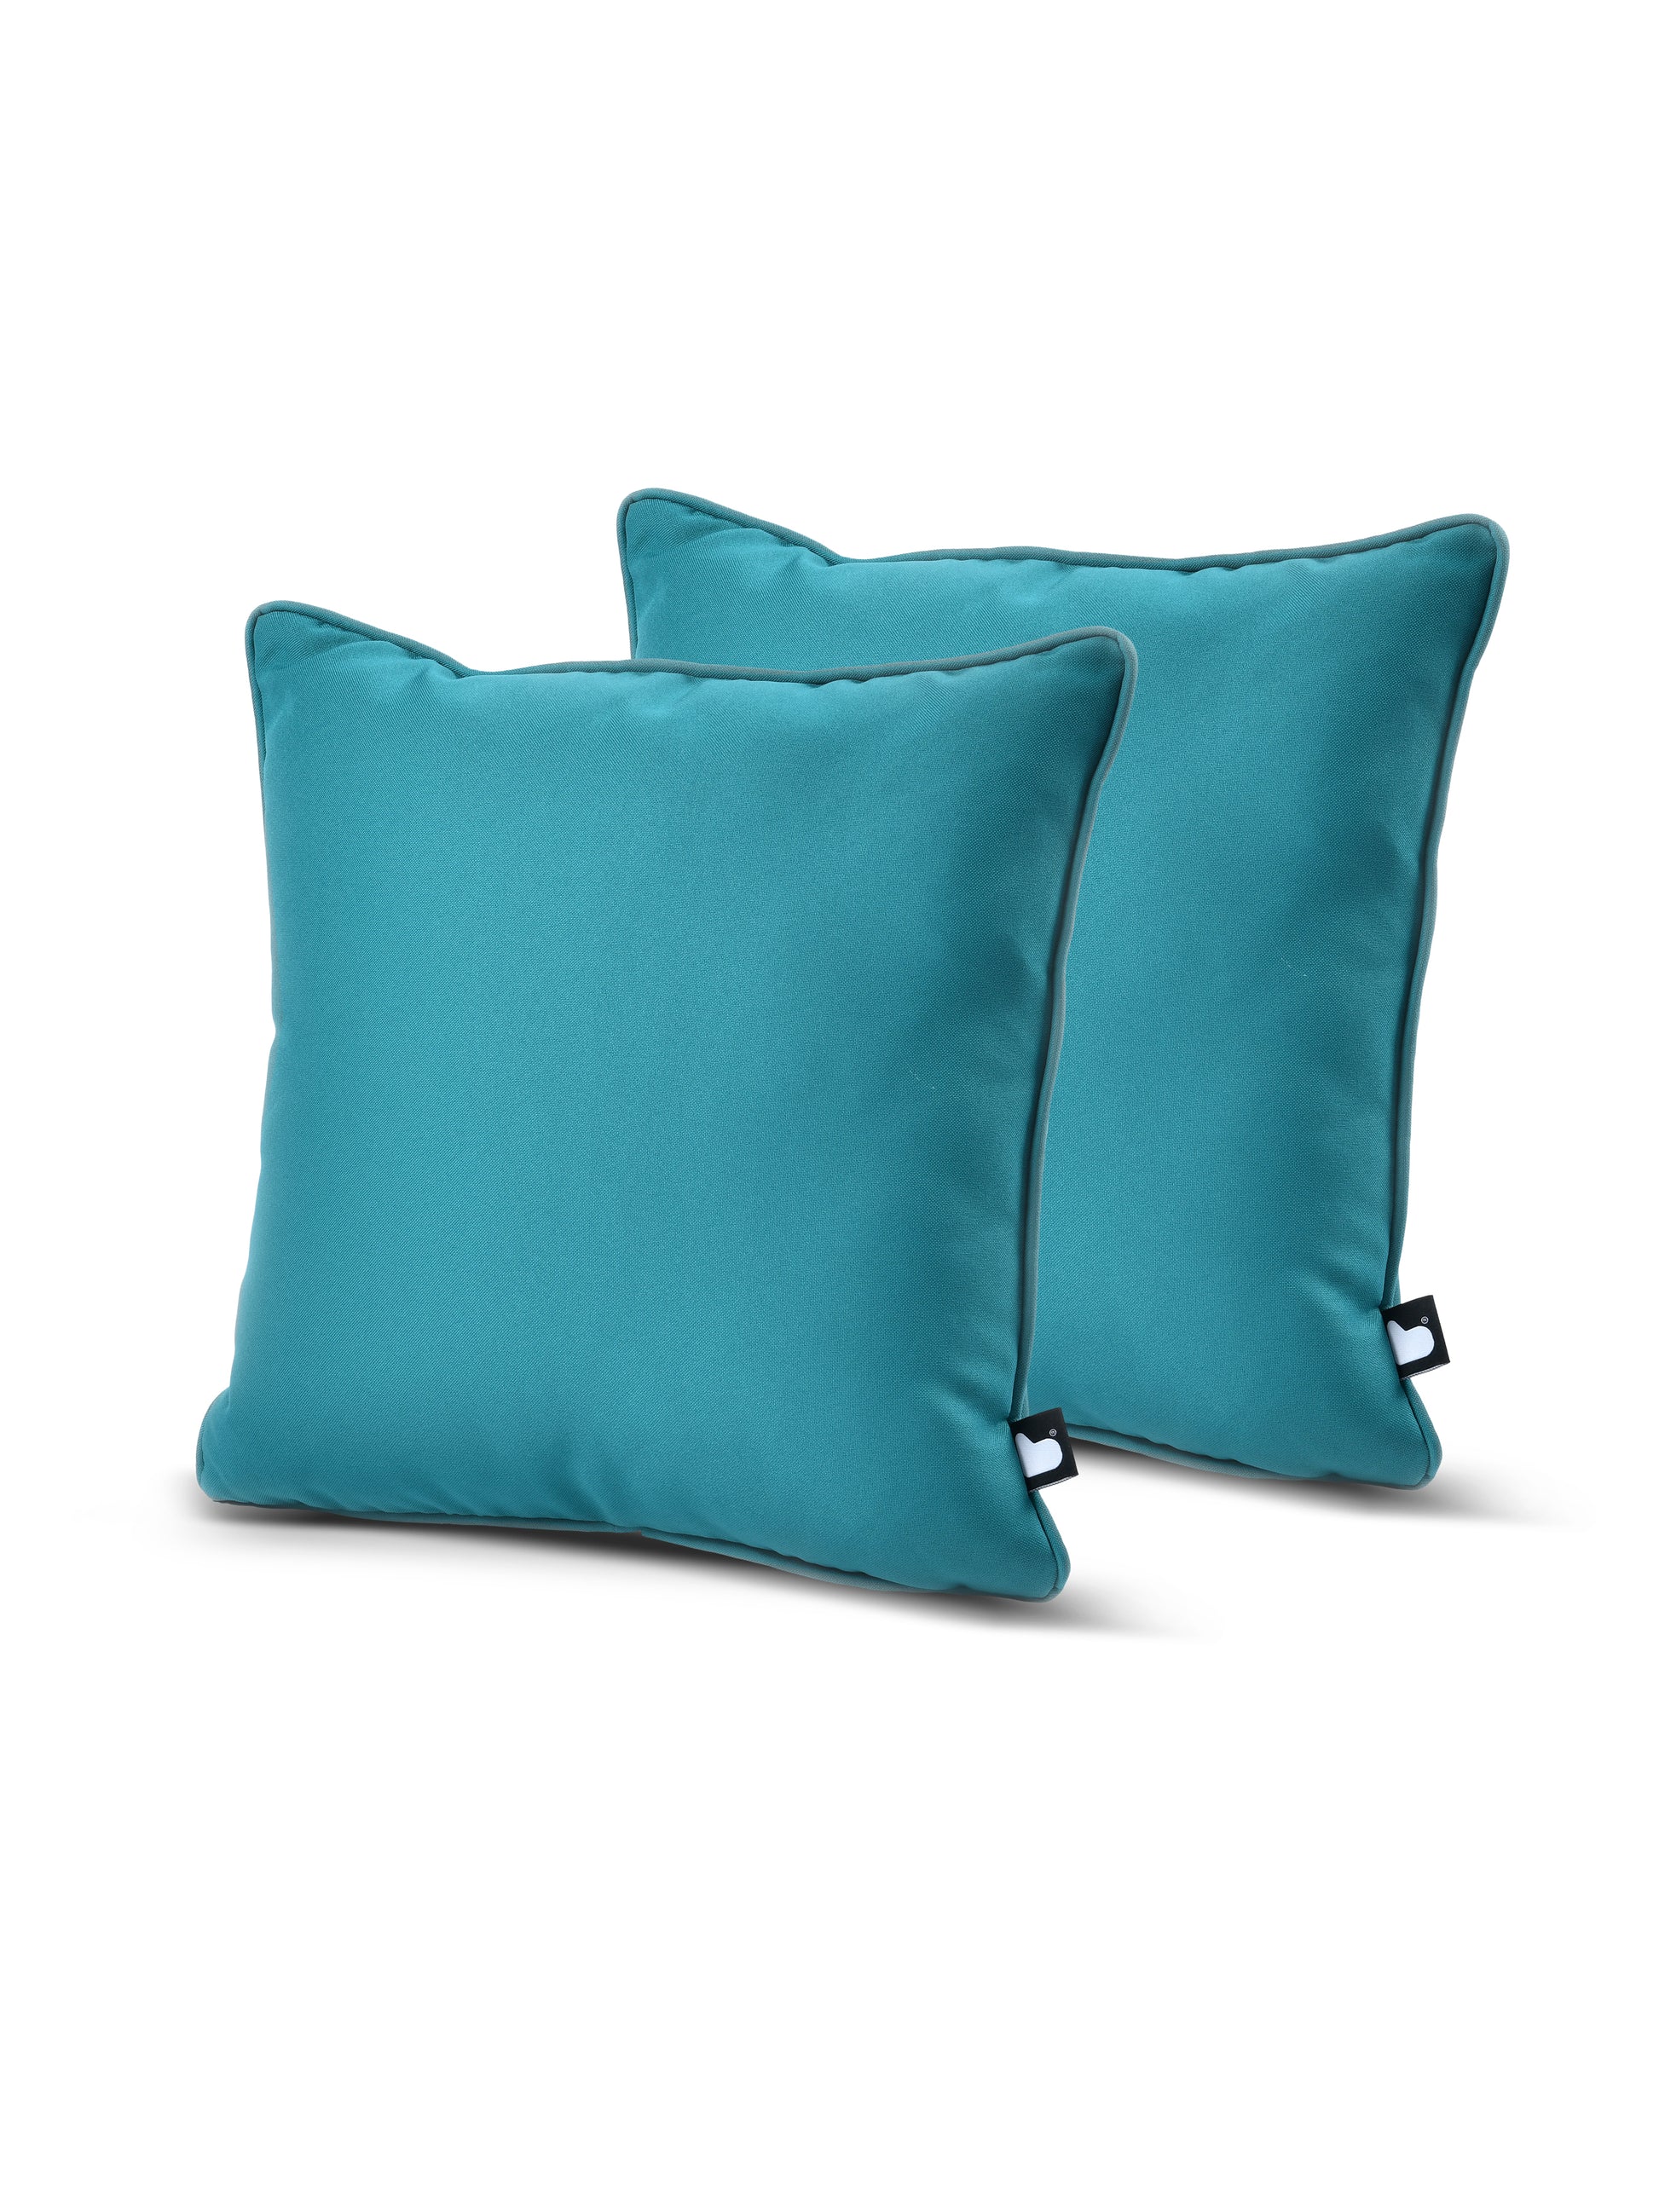 Two teal-colored square pillows are placed at slight angles against a plain white background. Both pillows, made from breathable polyester, have a smooth texture with a small black tag on the side edge. Their simple and modern design suggests an aesthetic and comfortable addition to home decor. These are part of the Brisks B Cushion Twin Pack Brights Collection.